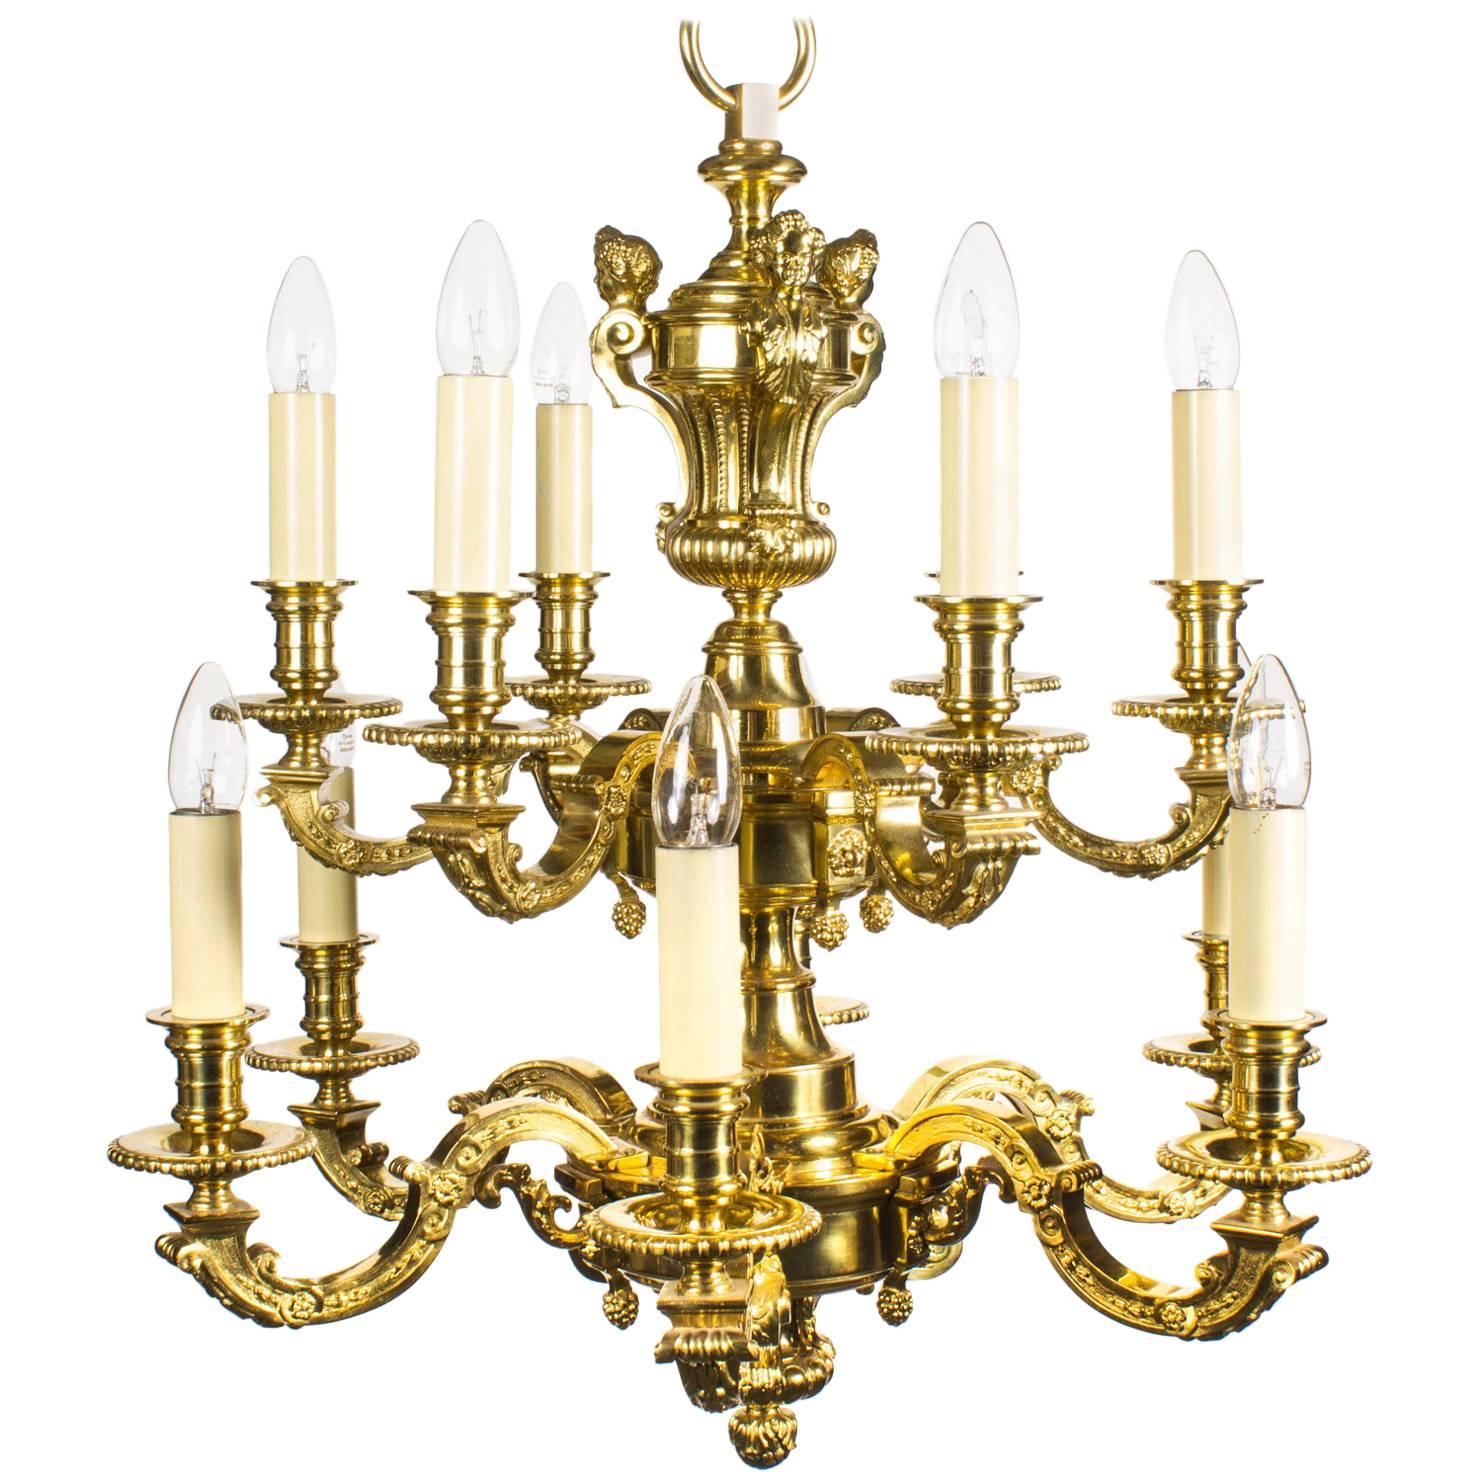 Early 20th Century French Louis XIV Style Twelve Branch Ormolu Chandelier